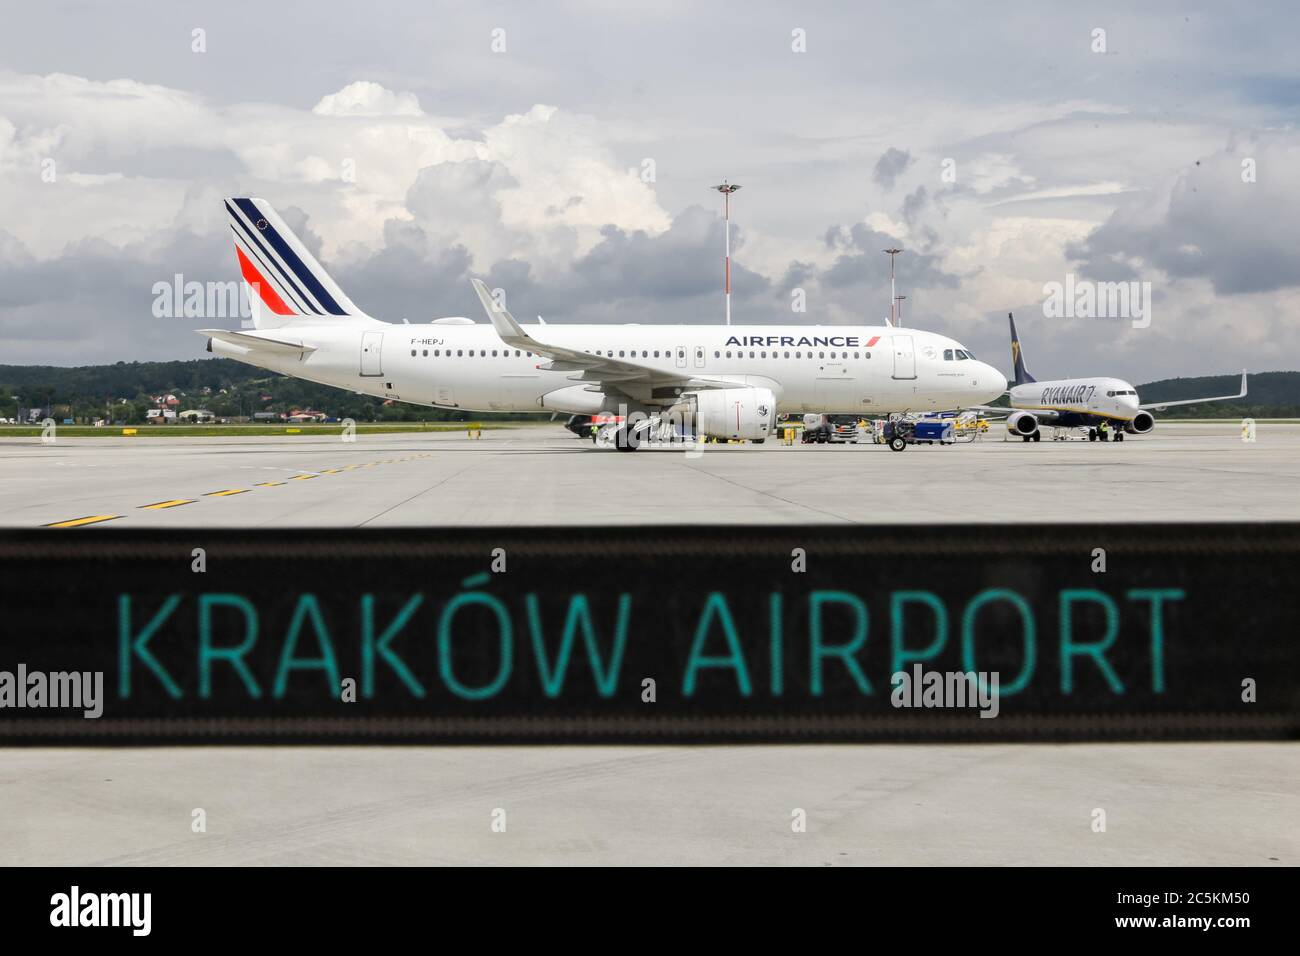 Air France Airbus A320 the air link Paris-Krakow seen at the Krakow Airport  during the inauguration.Inauguration of the Paris-Cracow air link operated  by the French national airline Air France. Since the lockdown